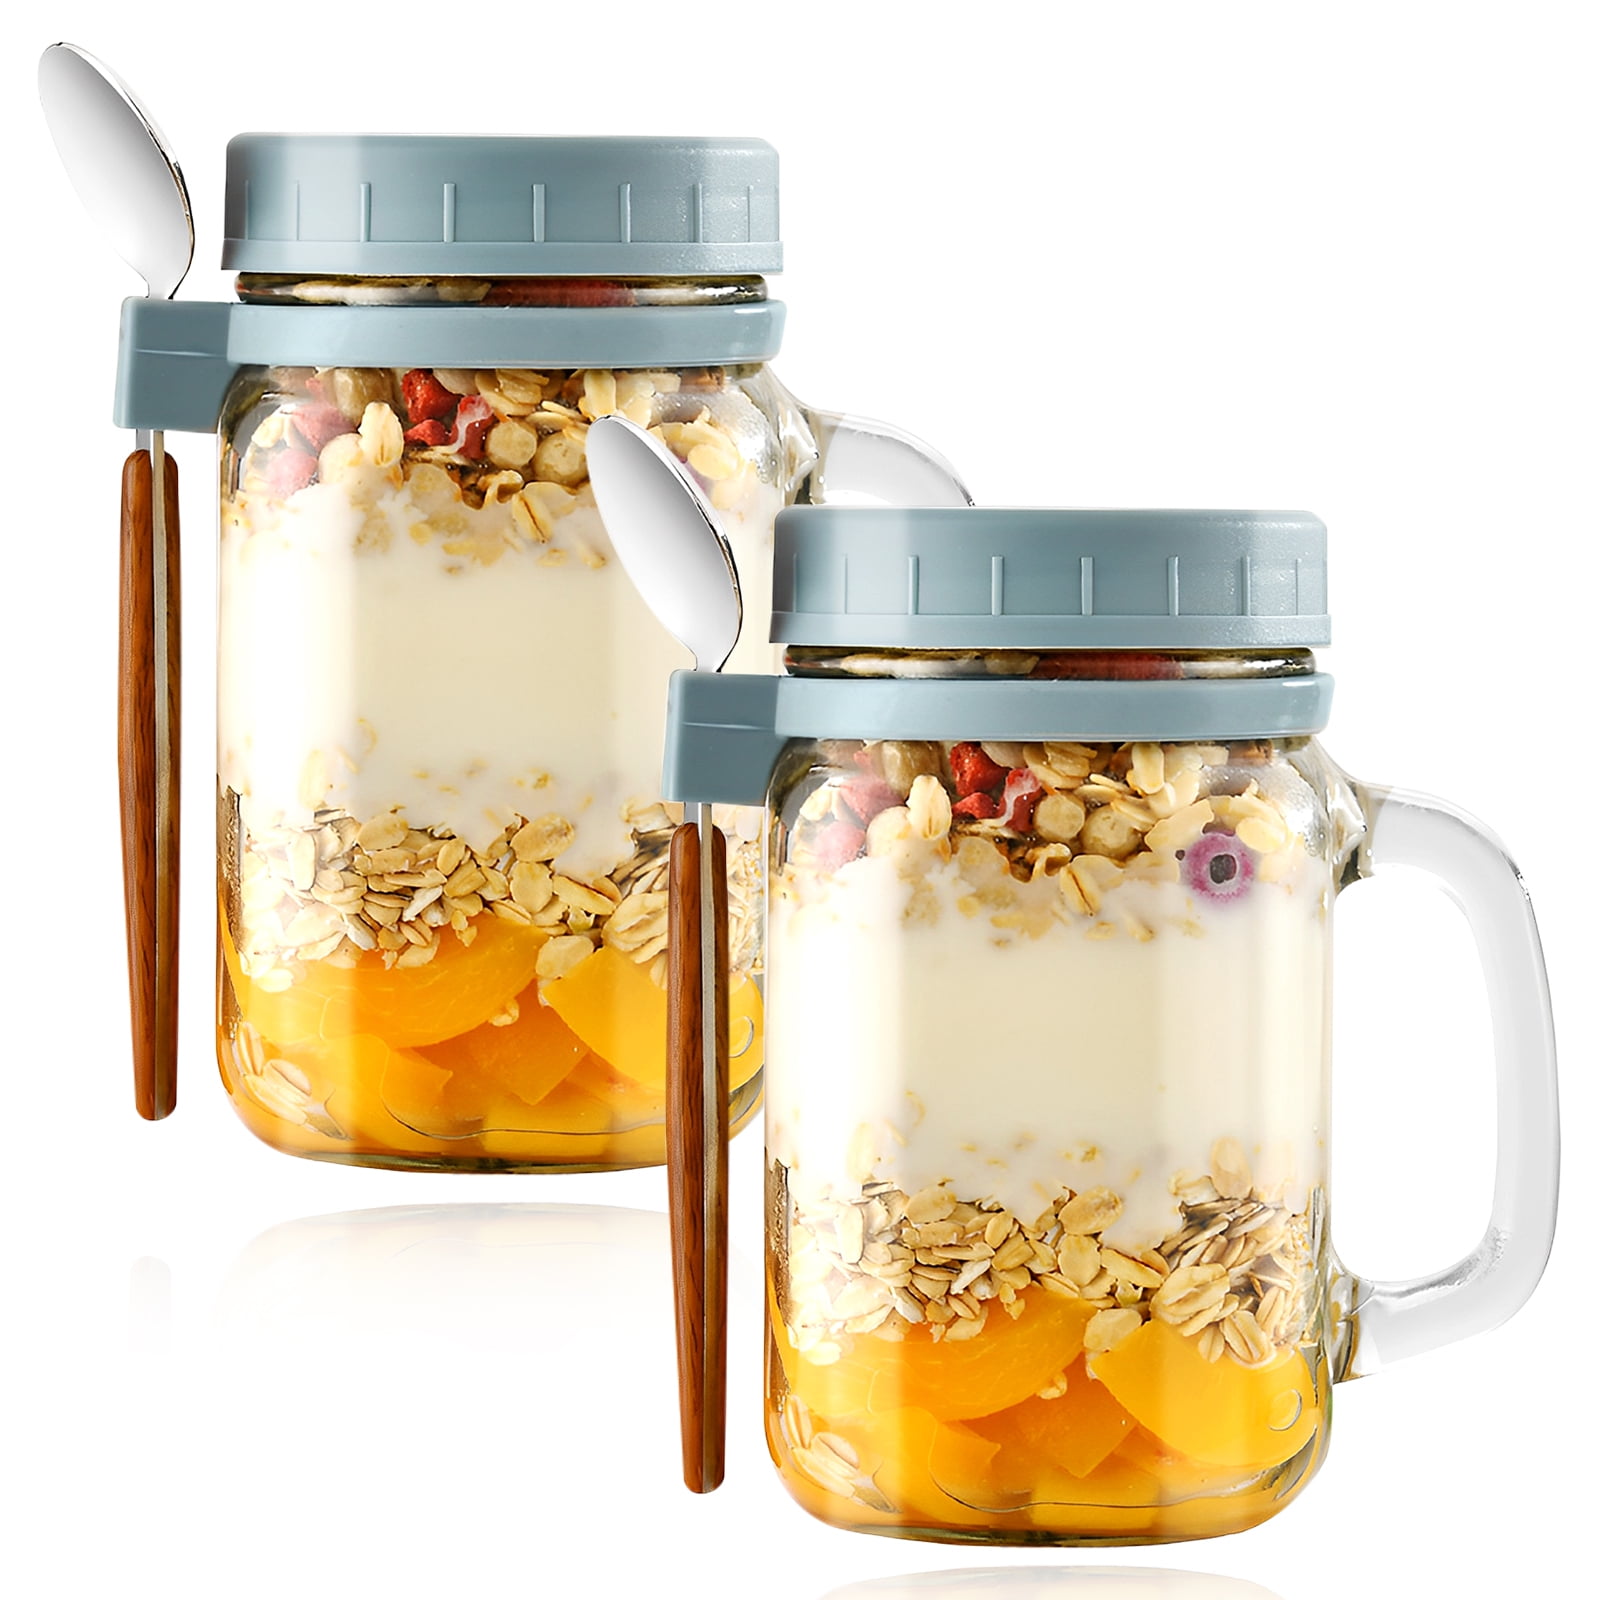 HomArtist Overnight Oats Containers with Lids and Spoons,16oz Mason Jars  for Overnight Oats,Glass Meal Prep Jars with Lids for Oatmeal,Yogurt,Great